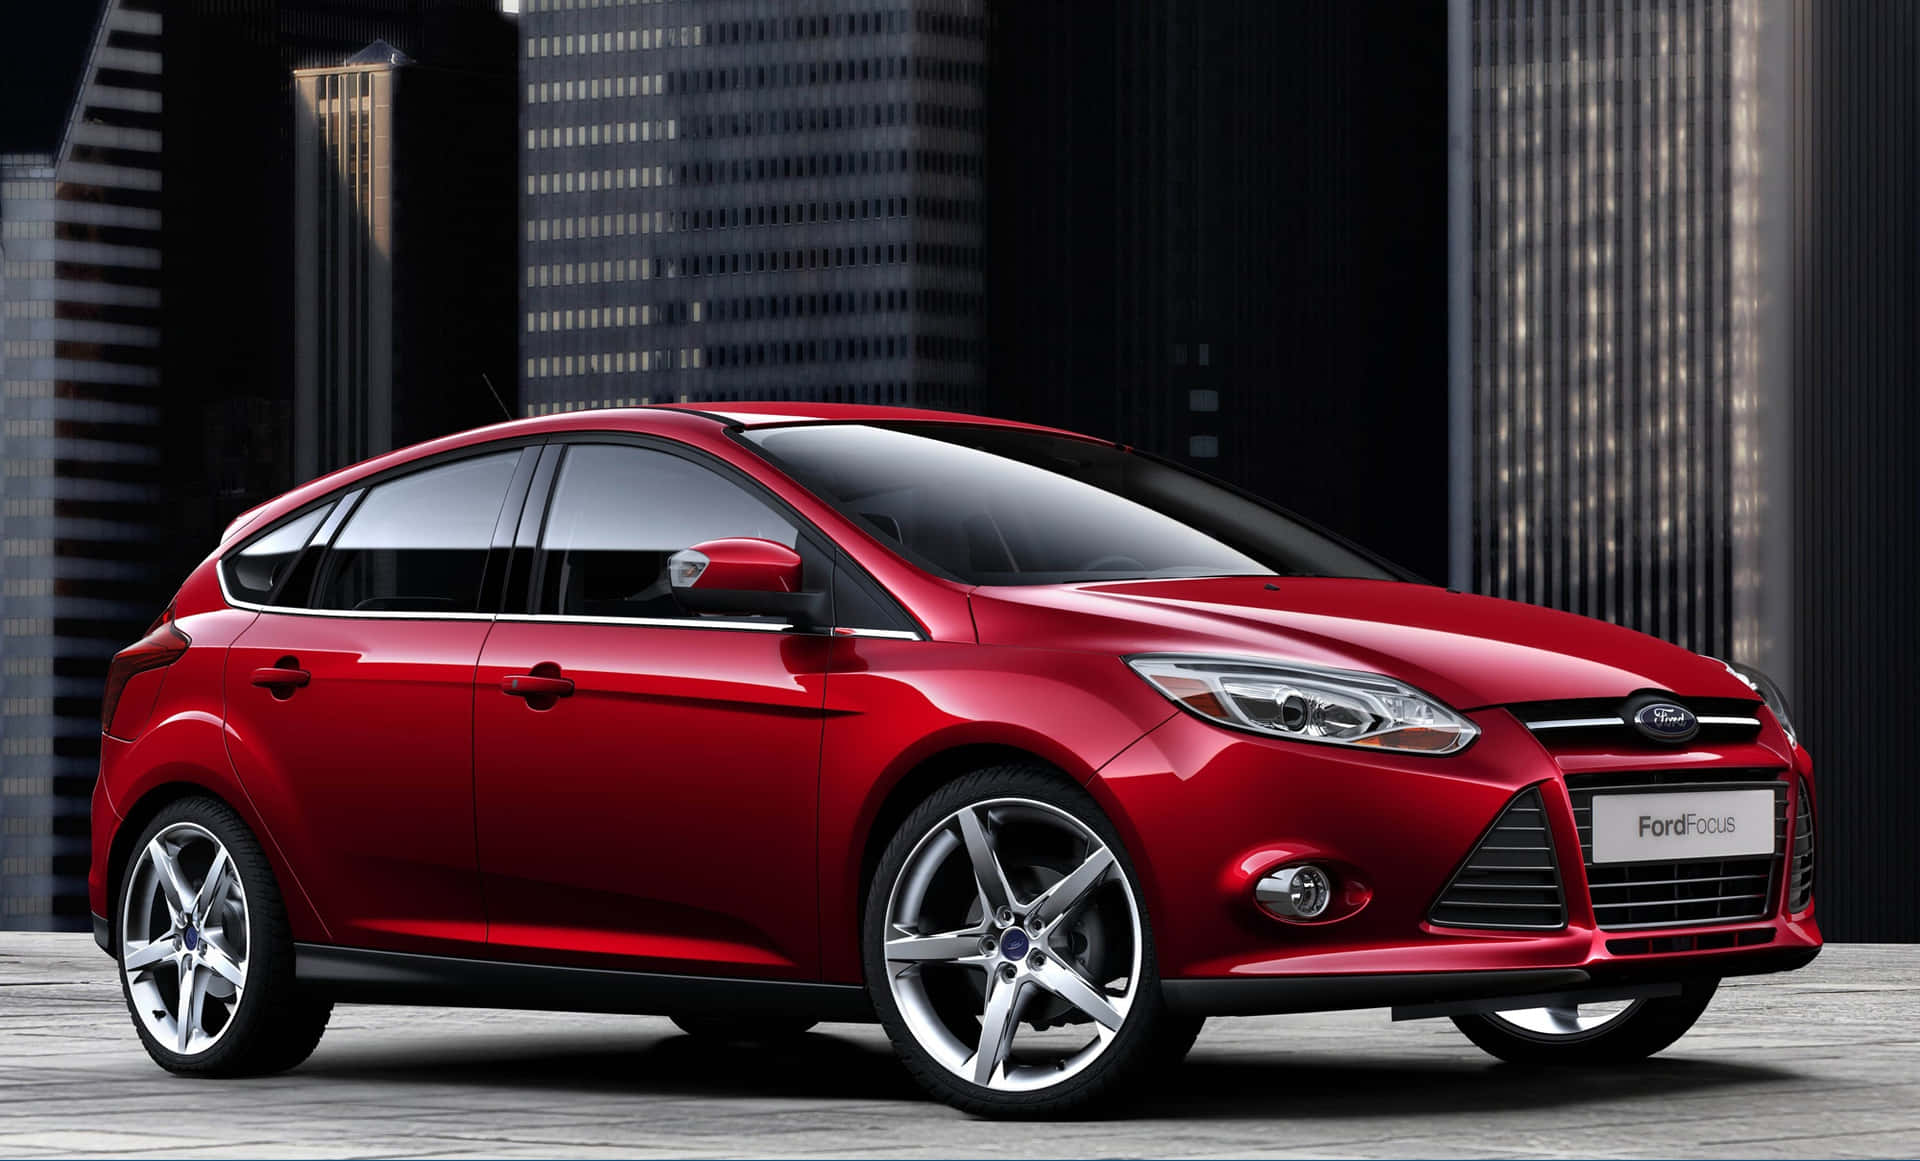 Sleek and Stunning Ford Focus on the Road Wallpaper